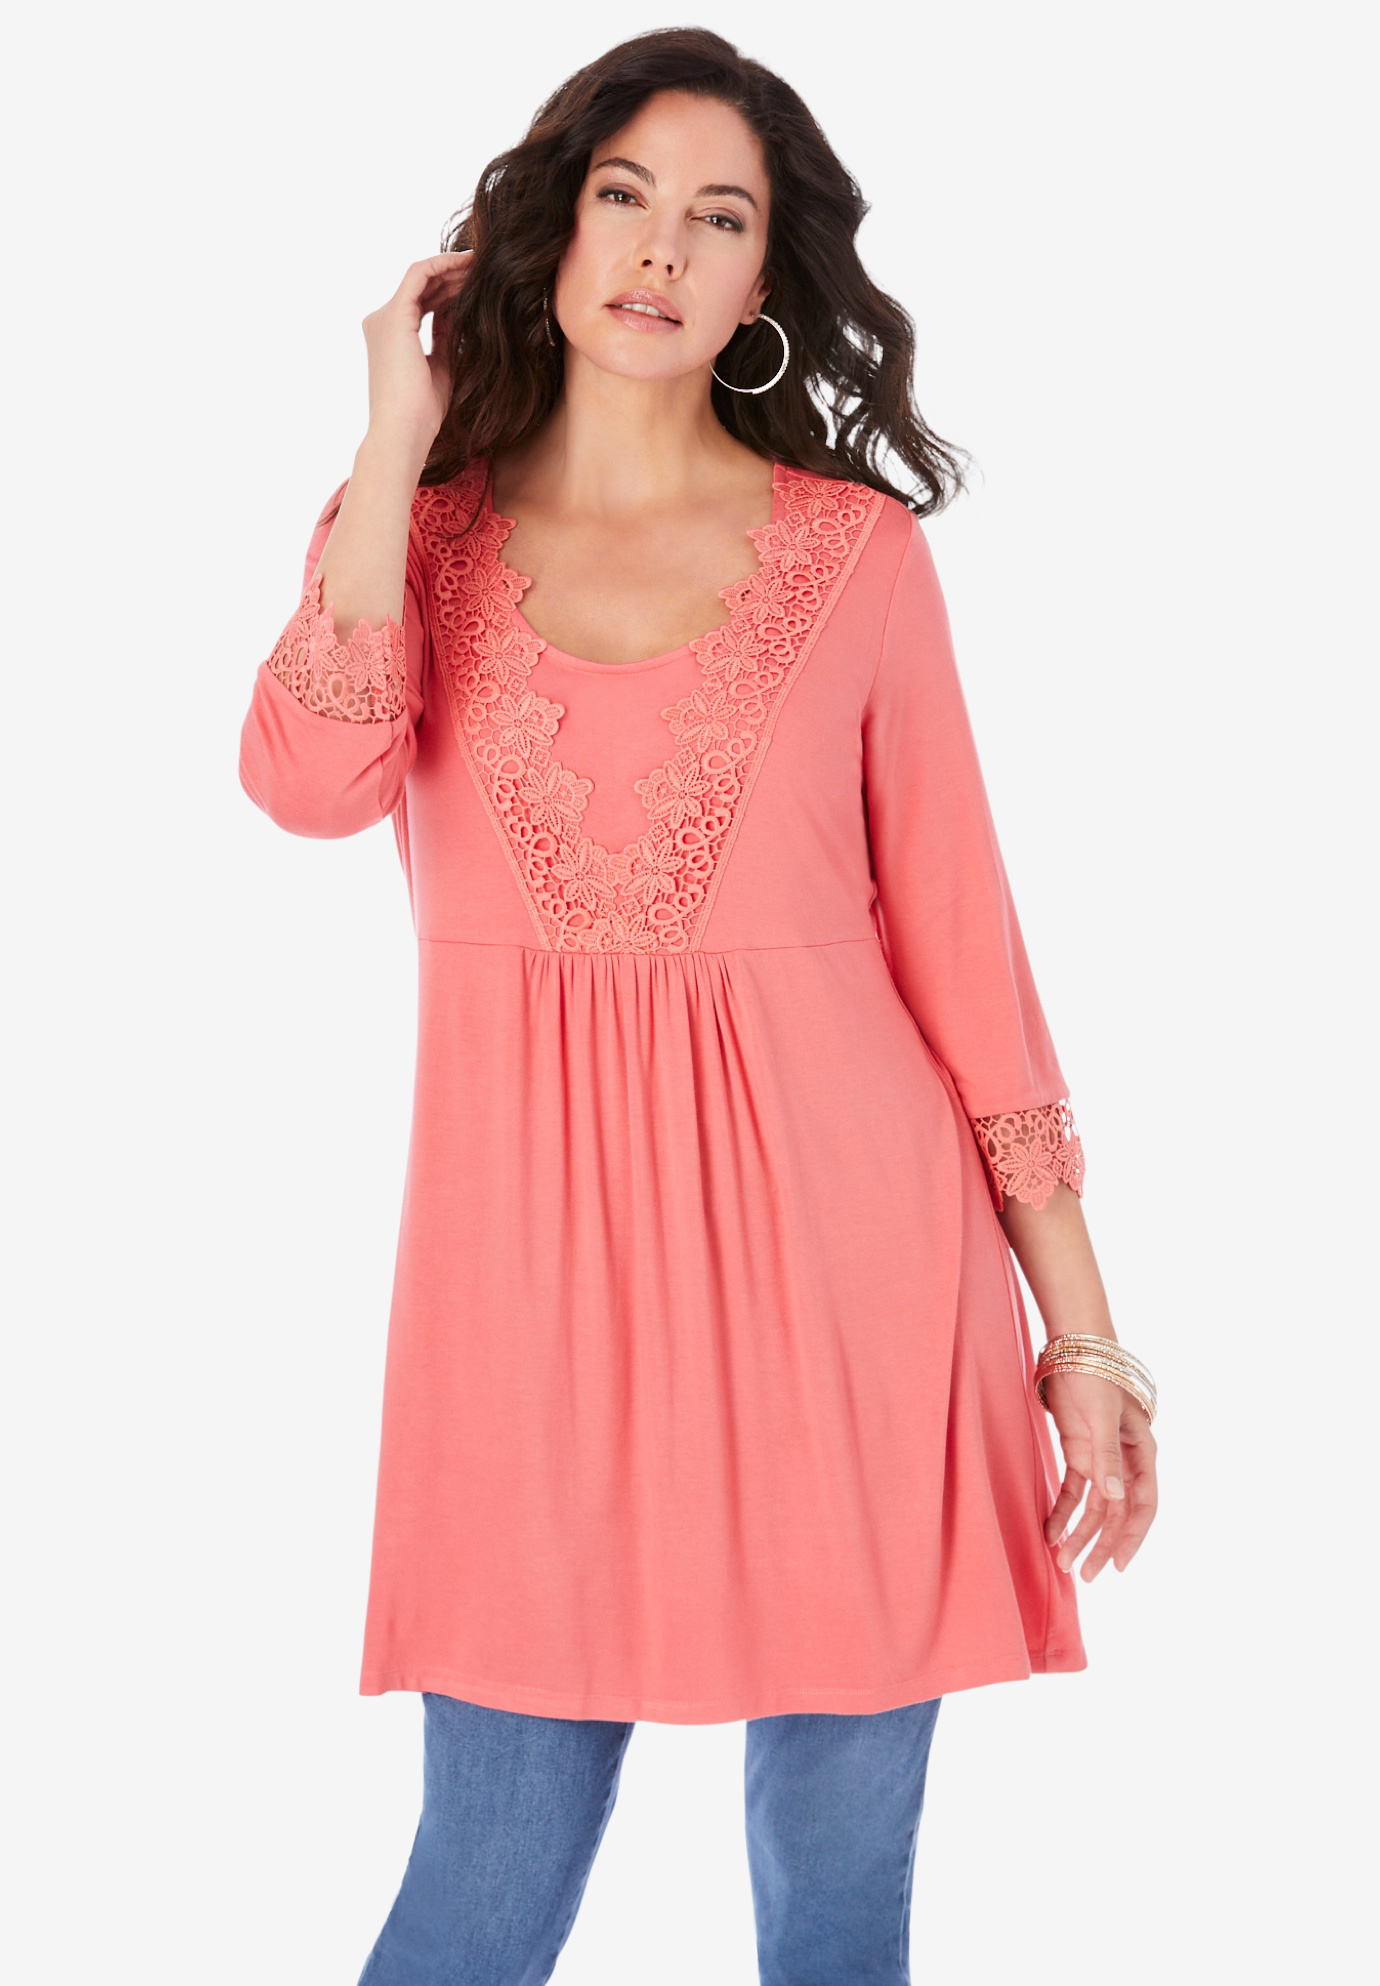 Lace-Applique Fit-and-Flare Ultra Femme Top, 